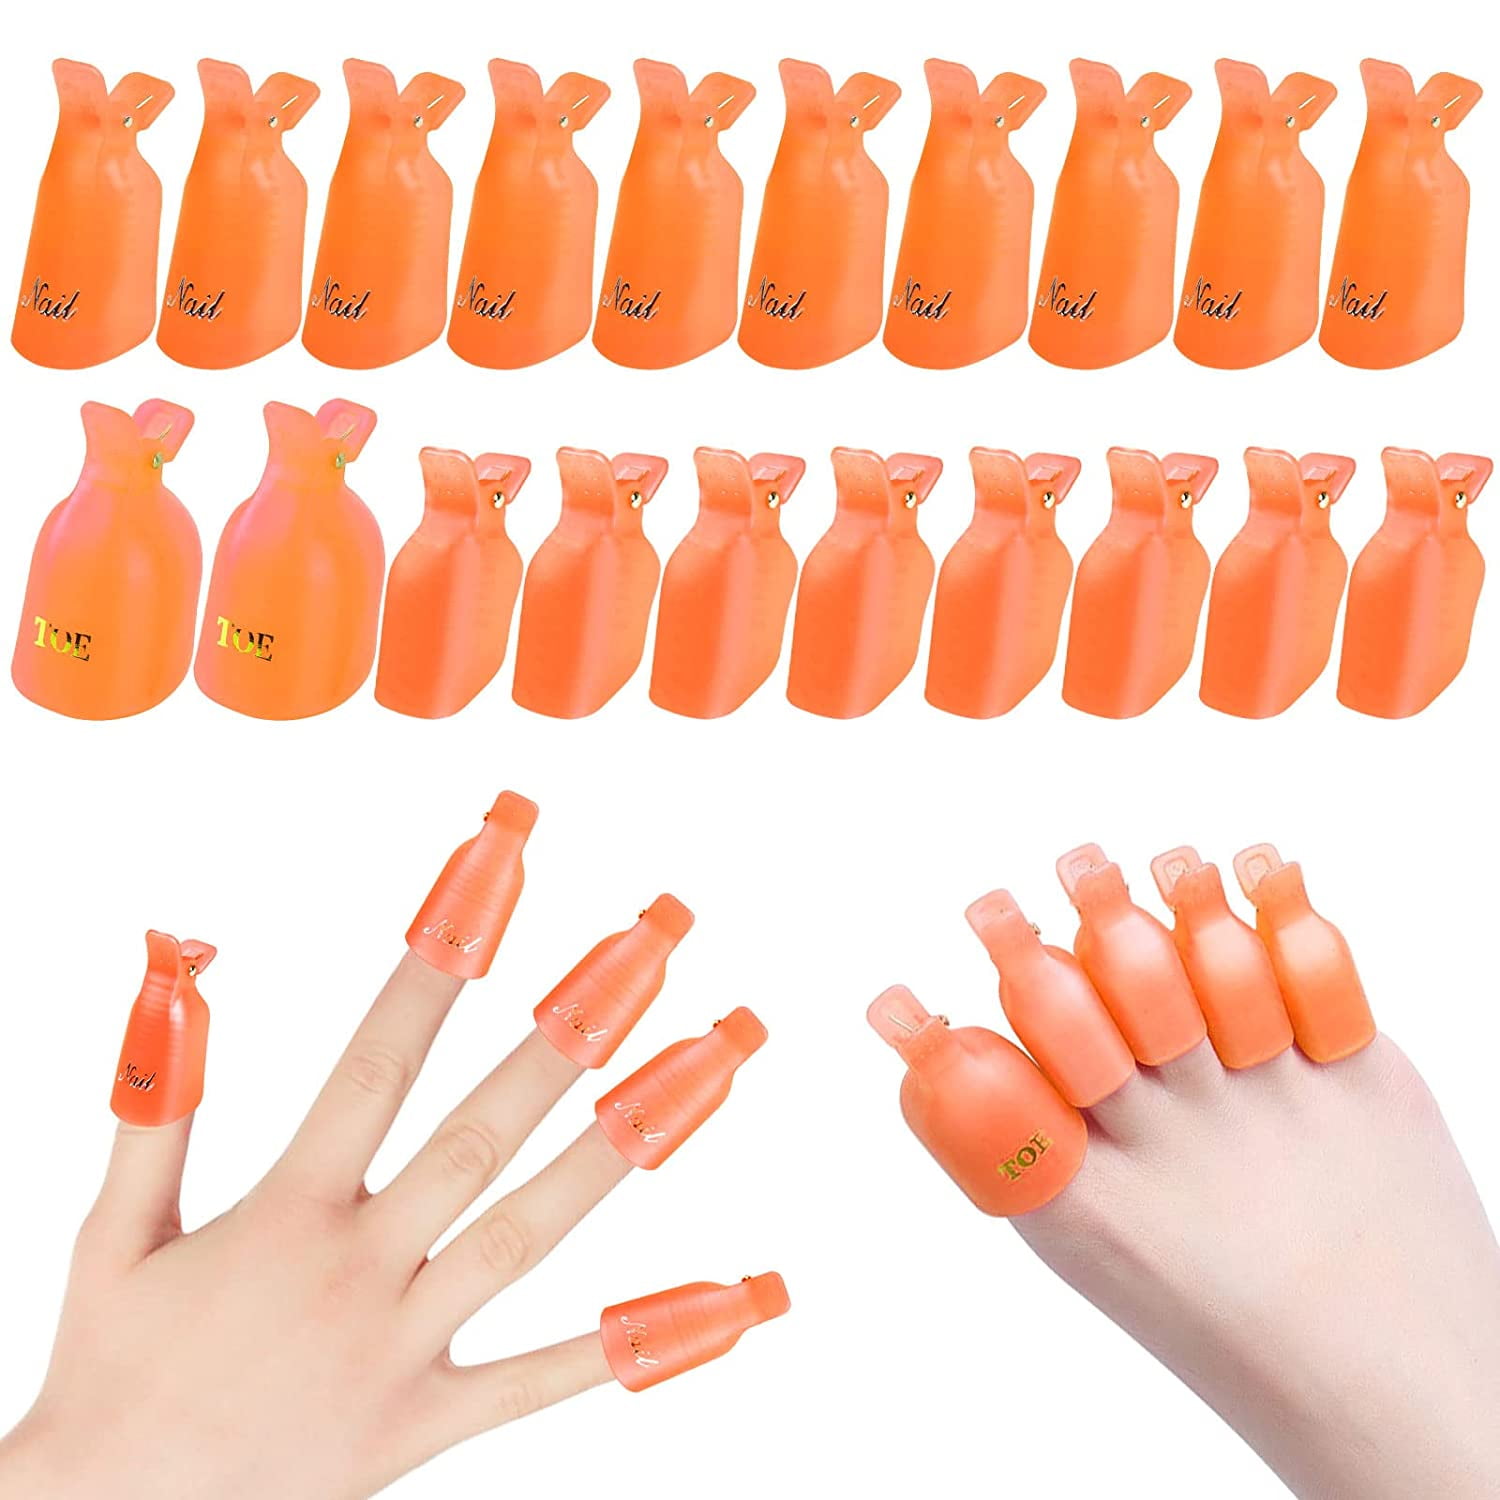 20 Pieces Reusable Toenail and Finger Gel Polish Remover Tool Best Gel Nail Polish Remover Kit Orange 431b2171 3bb5 45df 810d a3ac10d949cf.6c4d8b8116e55c5225236653c448d3f1